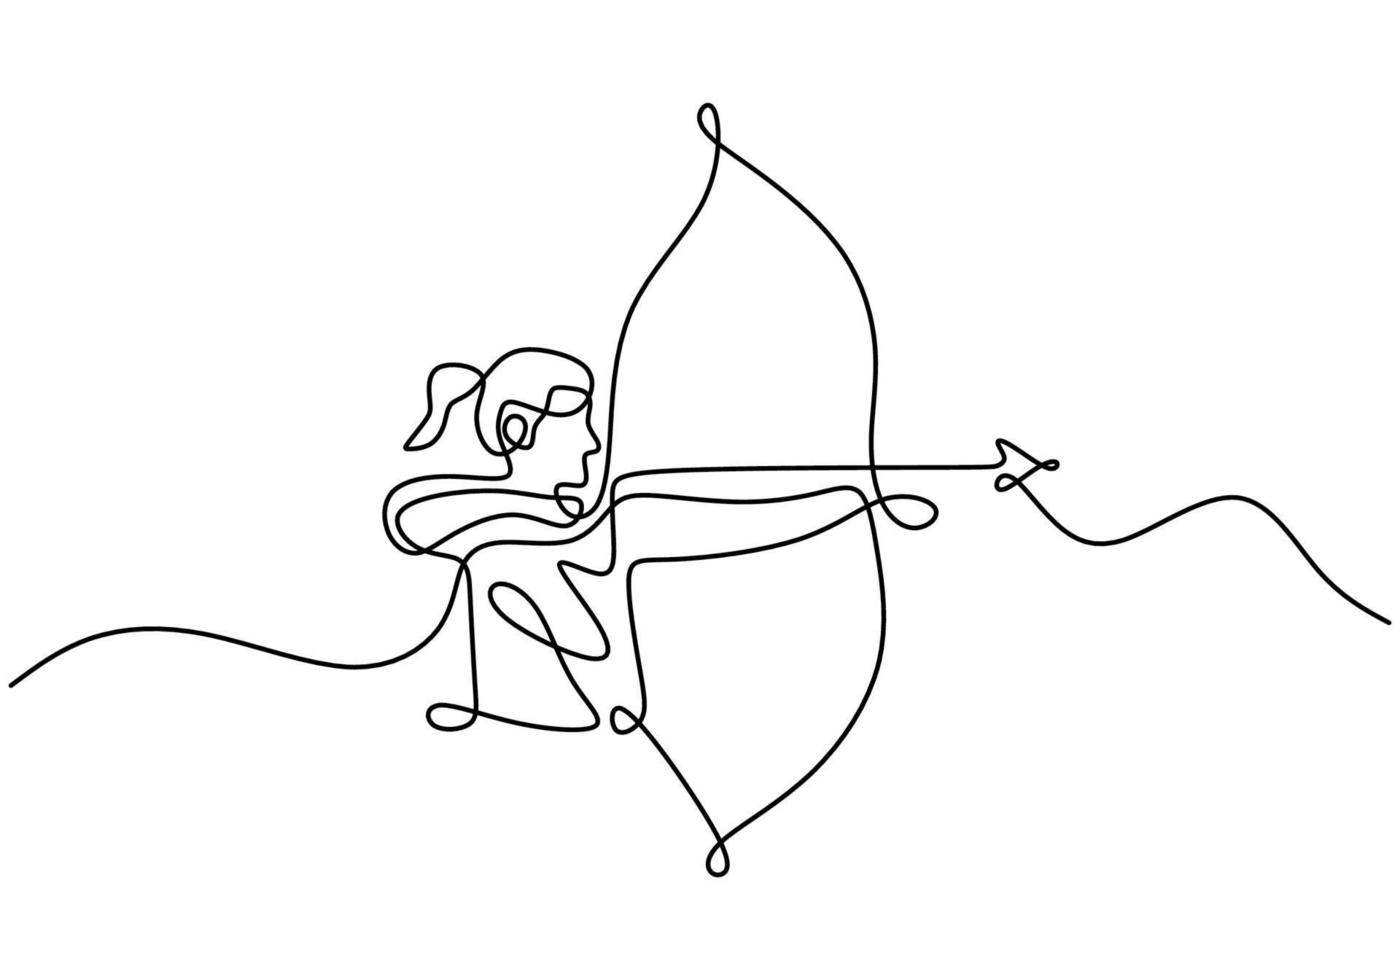 Continuous one line drawing of young energetic archer woman pulling the bow to shooting an archery target. A professional archer female focus to hit target hand drawn with minimalist design vector